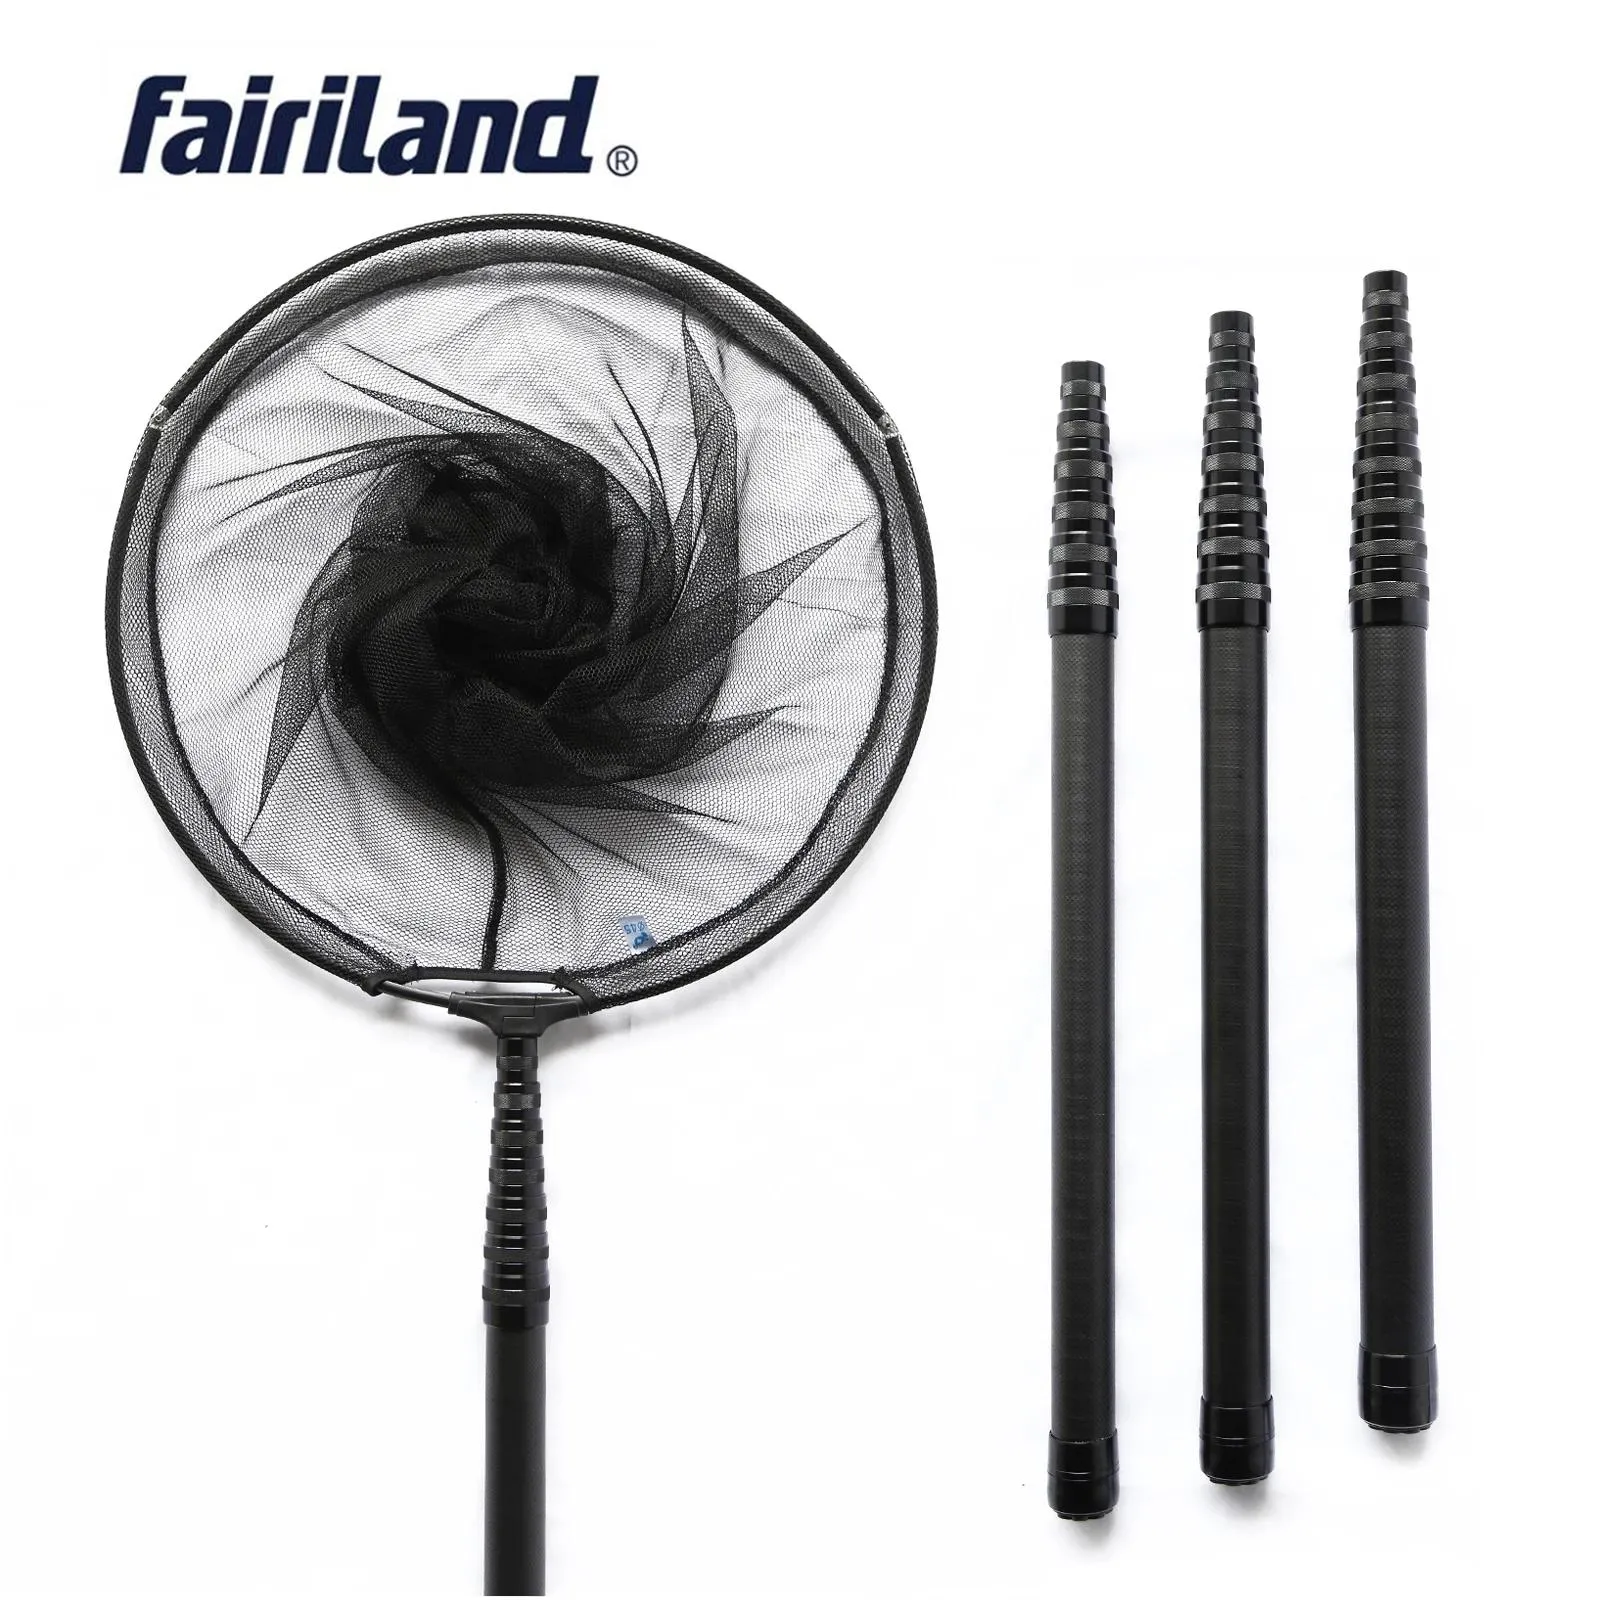 Combo 1.83.45m High Quality Carbon Fishing Net Fish Landing Hand Net  Foldable Collapsible Telescopic Pole Handle Fishing Tackle